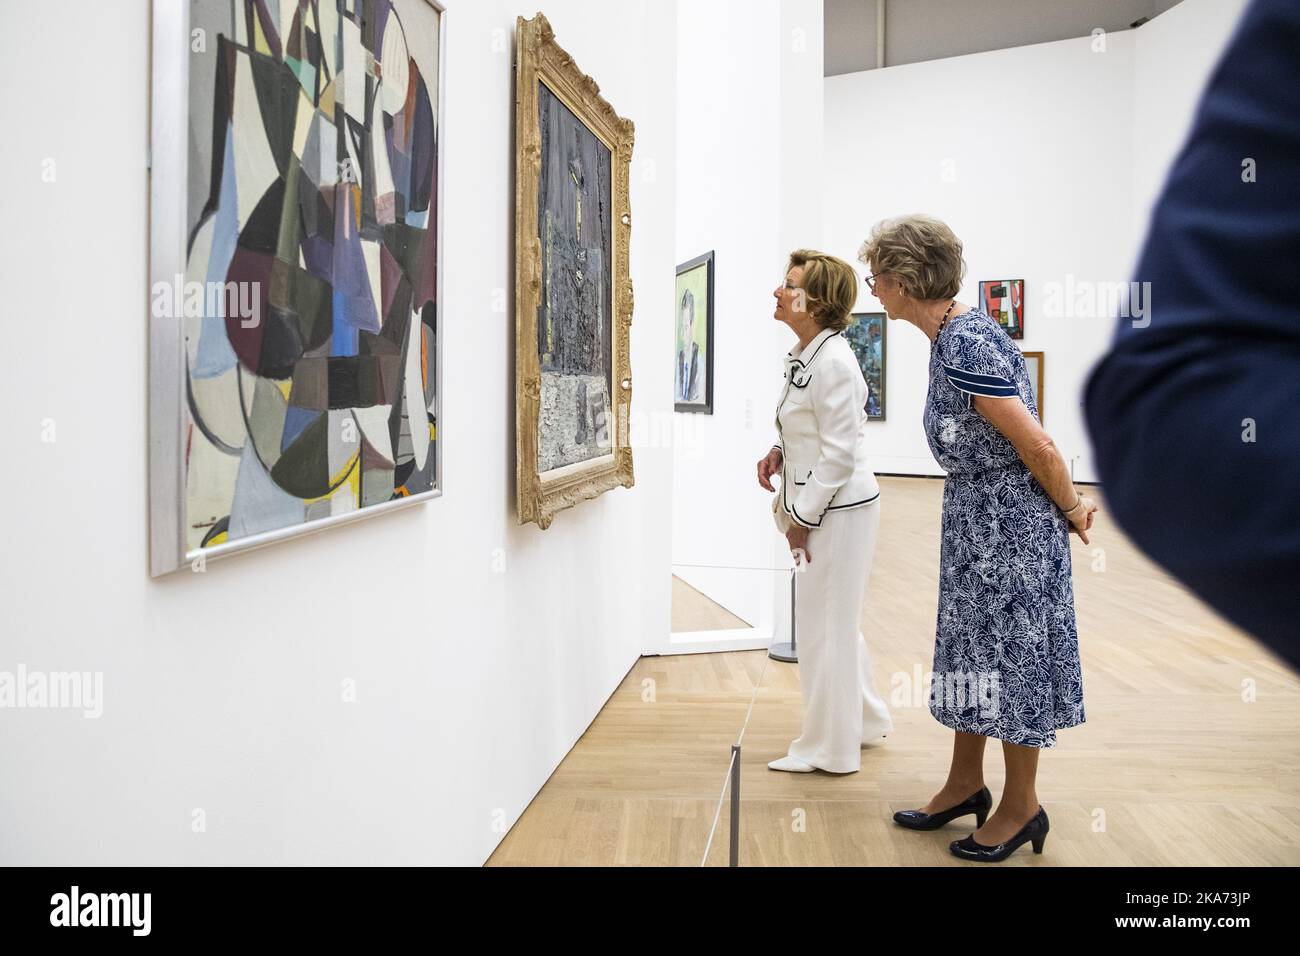 HOVIK, NORWAY 20180615. Queen Sonja is present during the opening of the Jakob Weidemann exhibition at Henie Onstad Art Center at Hovik. Queen Sonja and curator Karin Hellandsjo study the artwork 'Kongen'. Photo: Haakon Mosvold Larsen / NTB scanpi  Stock Photo